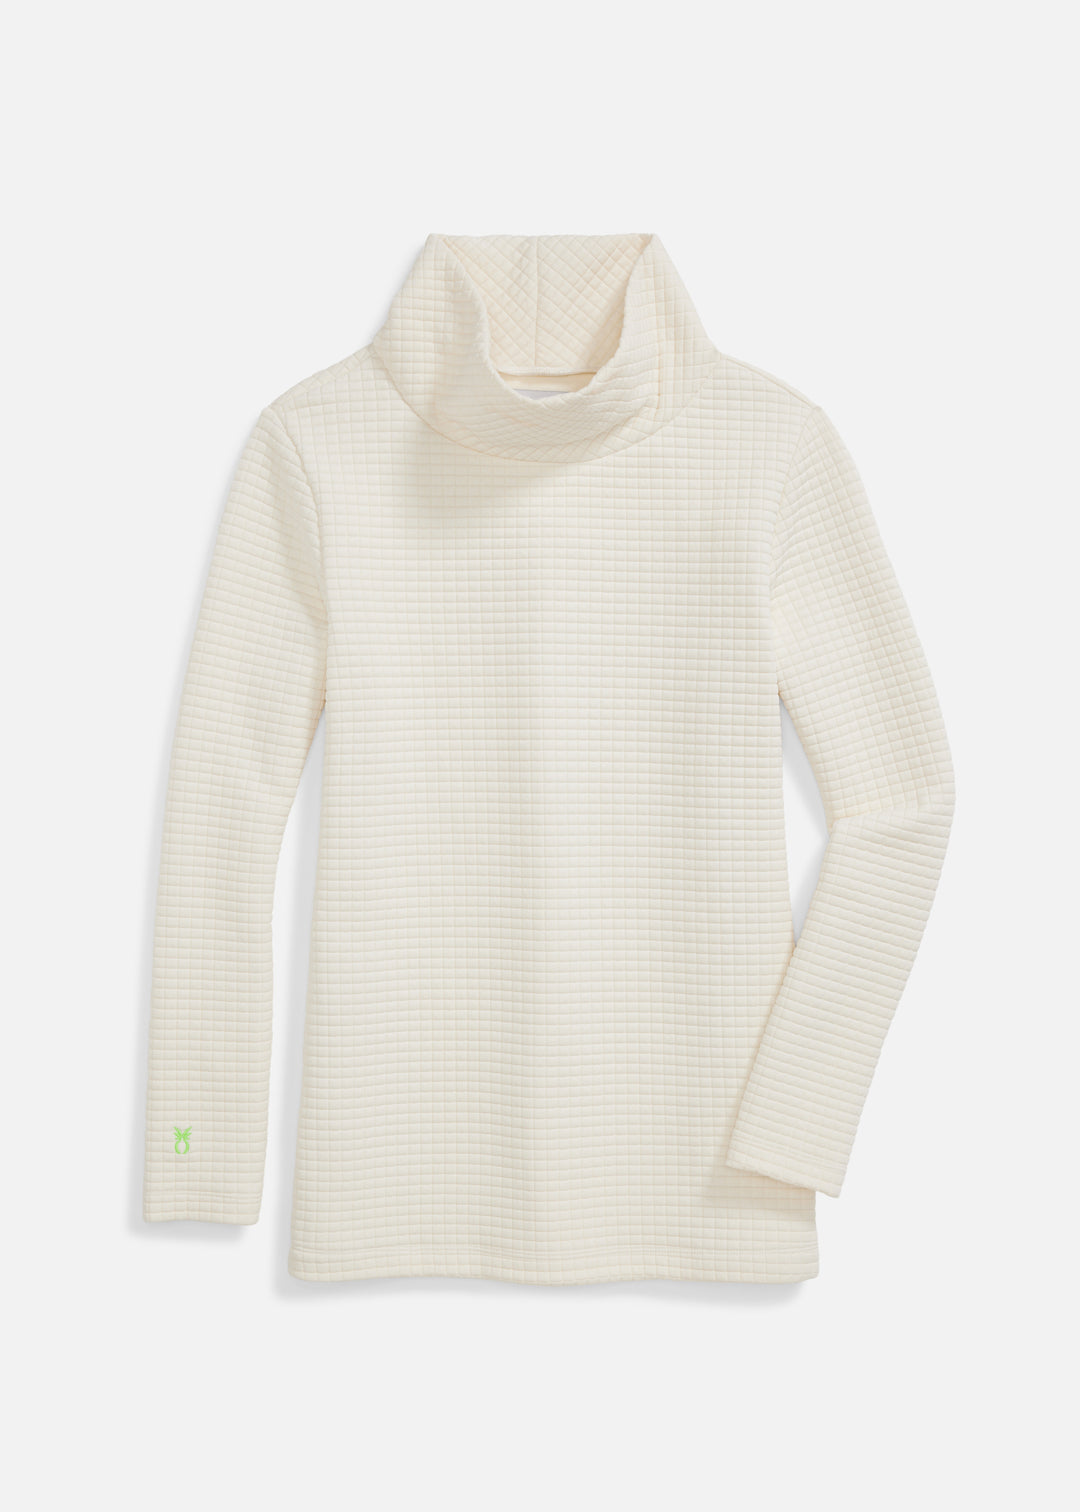 Cobble Hill Turtleneck in Waffle (Cream)